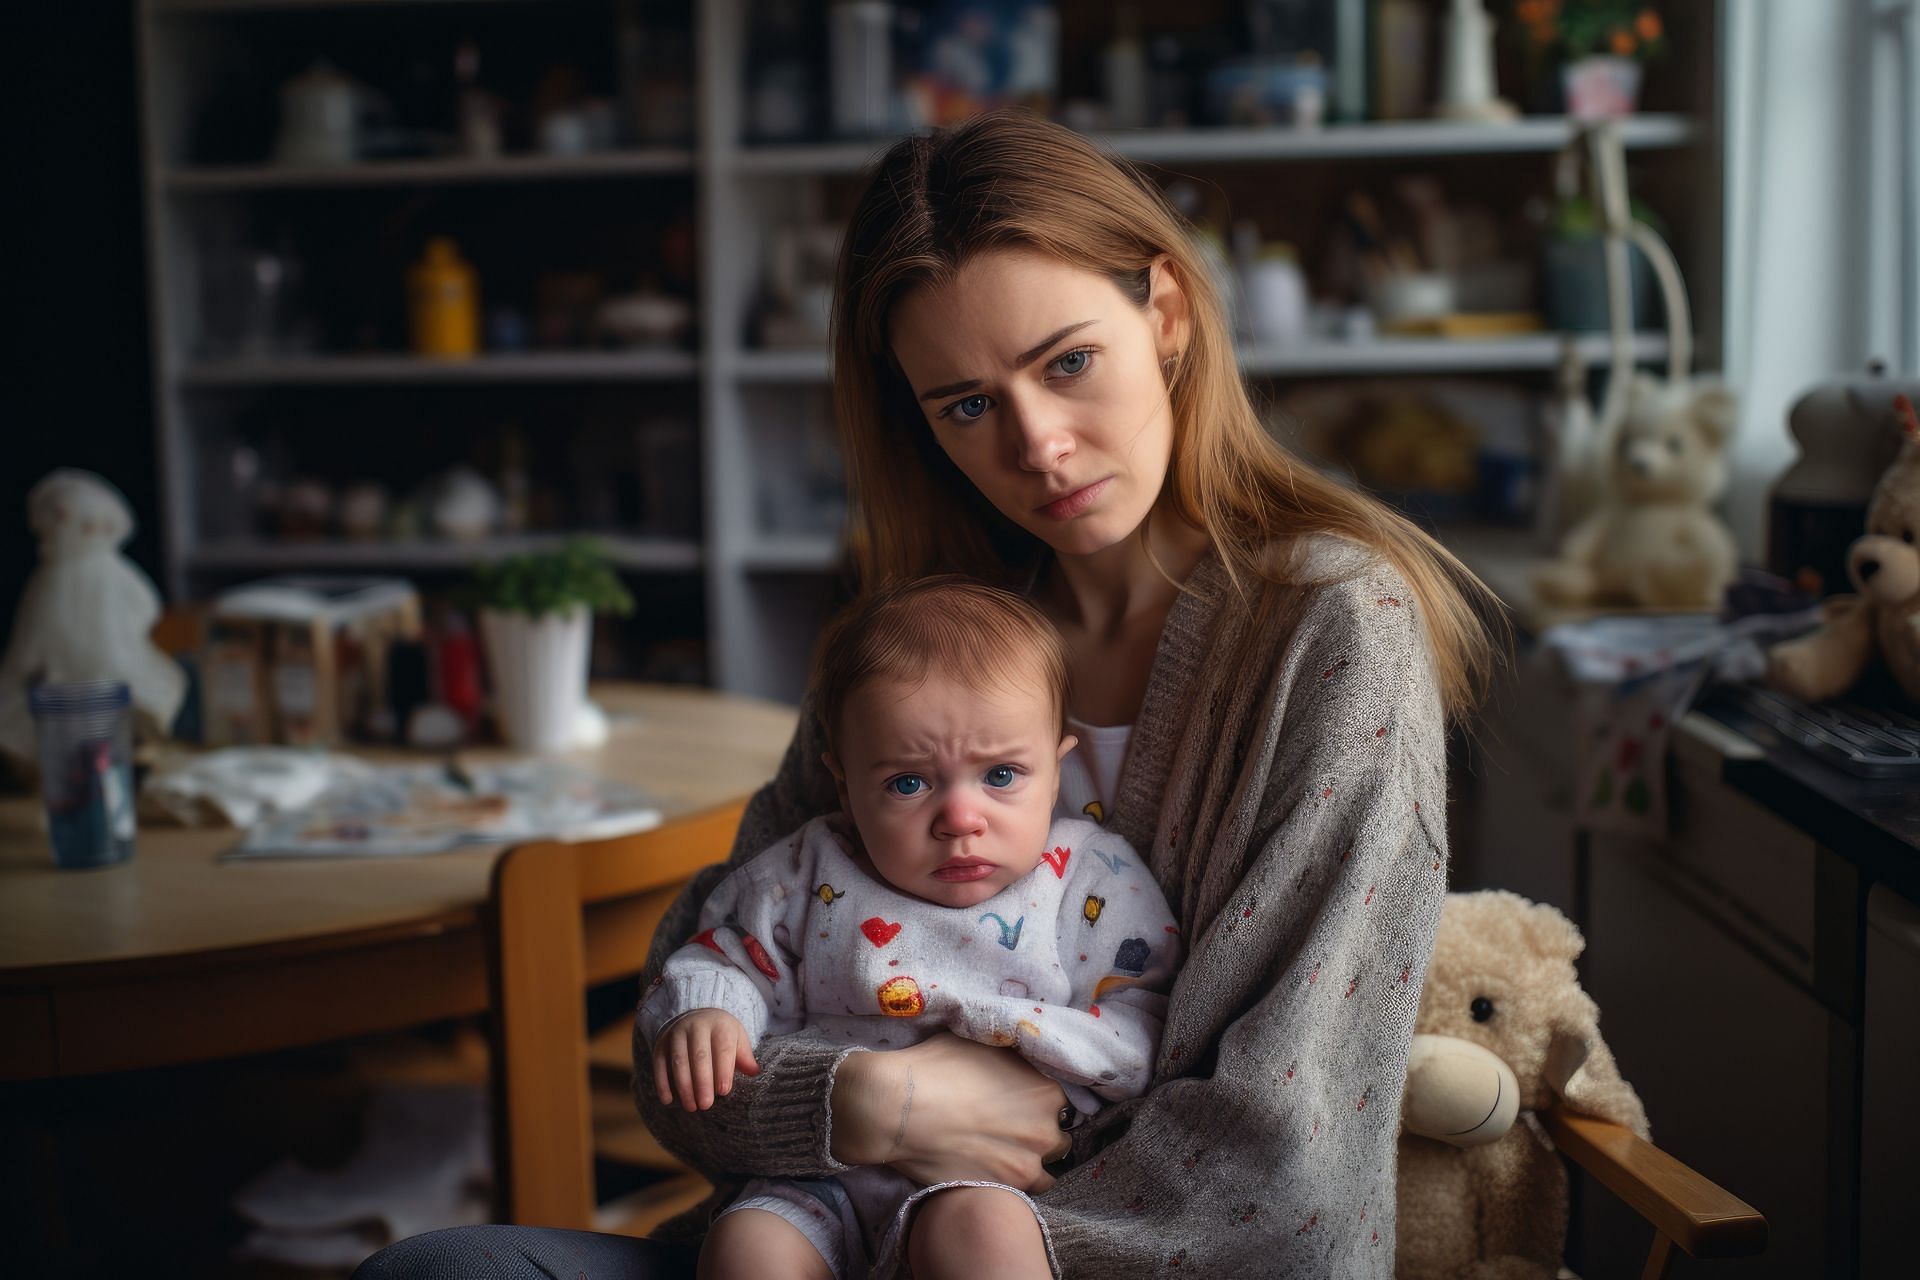 Postpartum psychosis is often considered as a medical emergency that can cause difficulties for parents. (Image via Vecteezy/ Yulia Ryabokon)